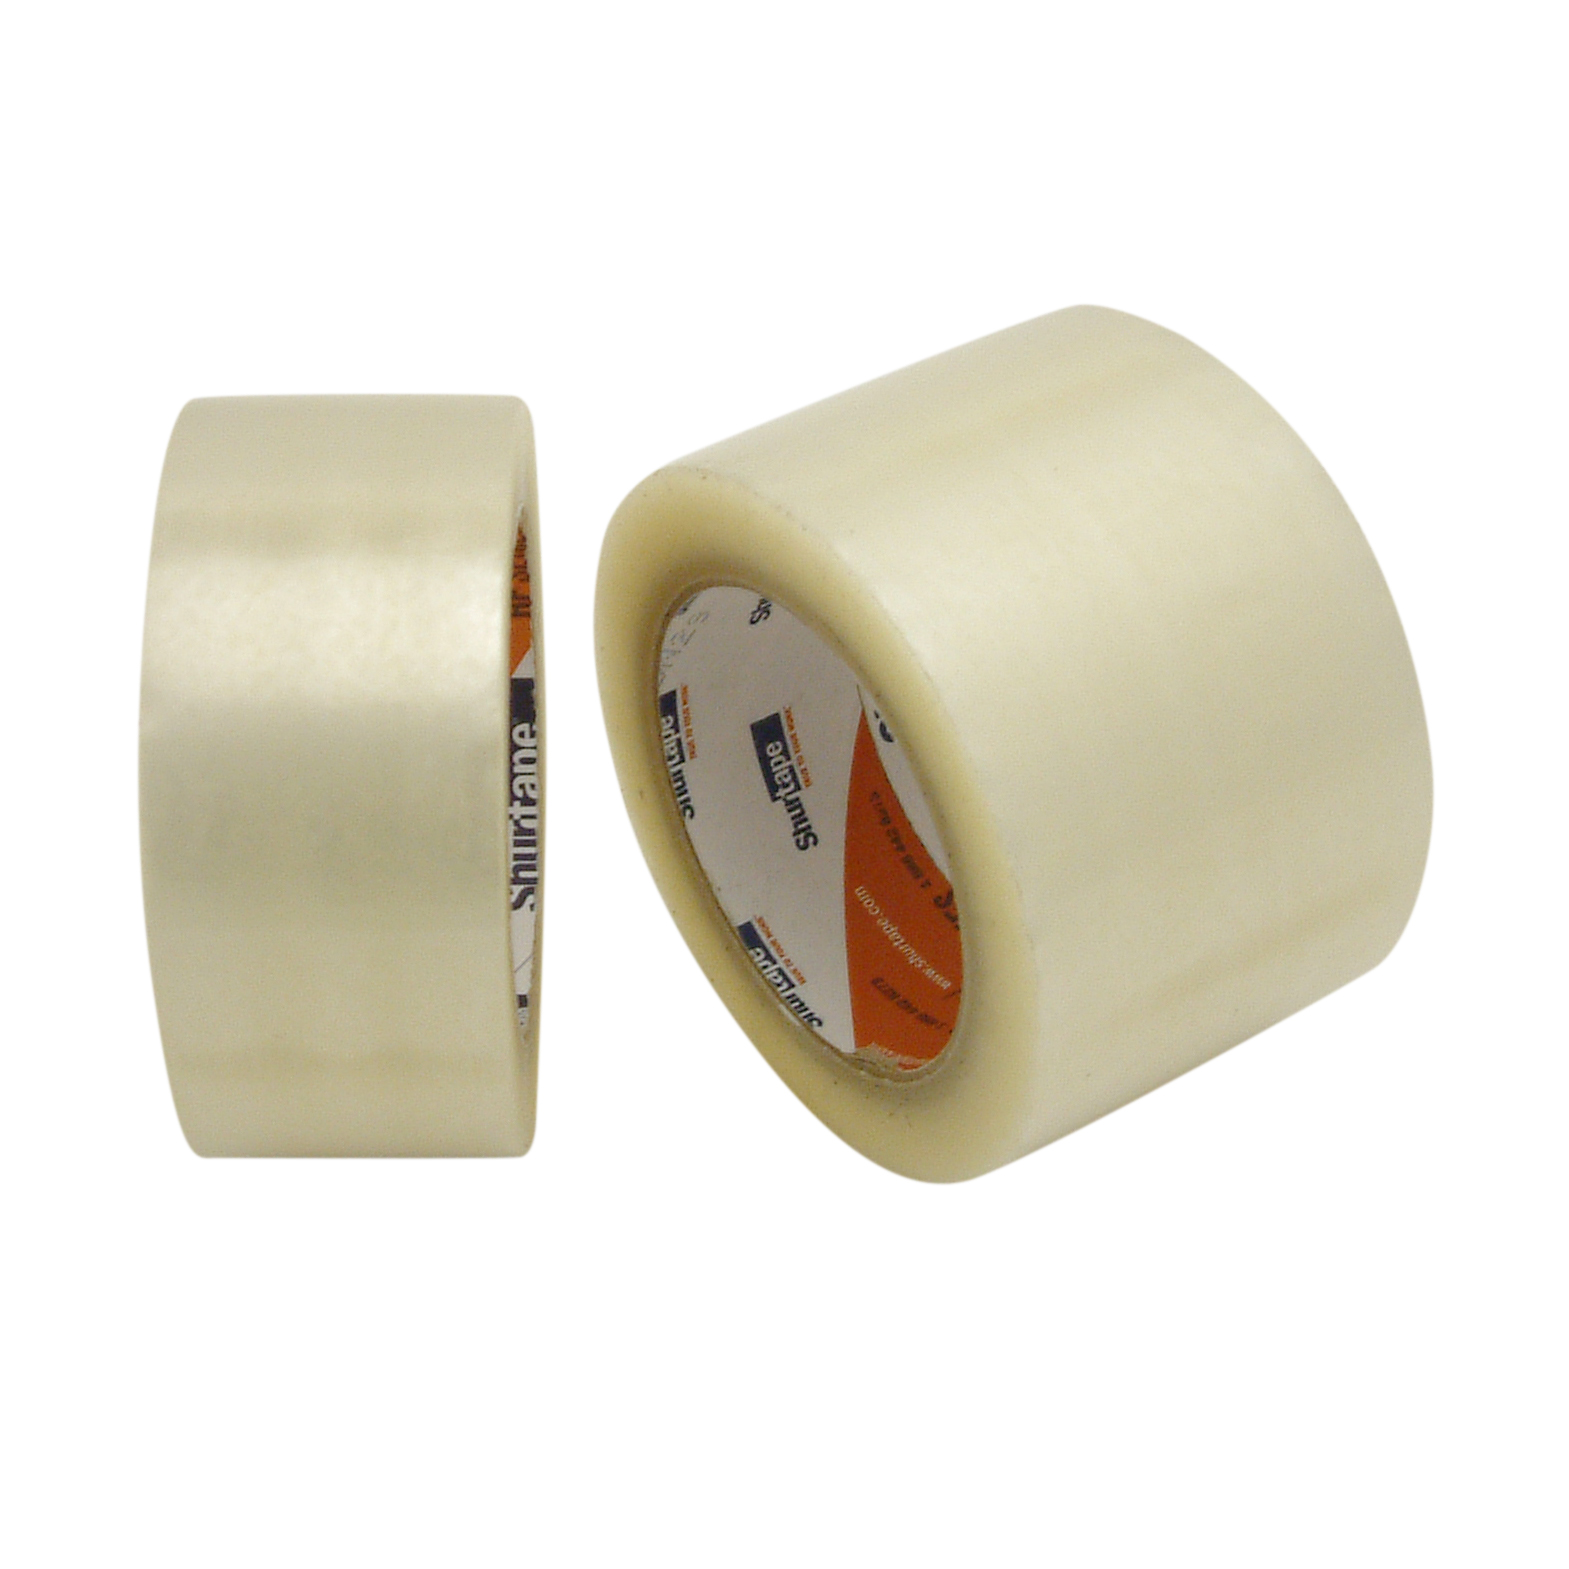 48 ROLLS OF EXTRA WIDE 3" BROWN PACKING TAPE 72mm x 66M 